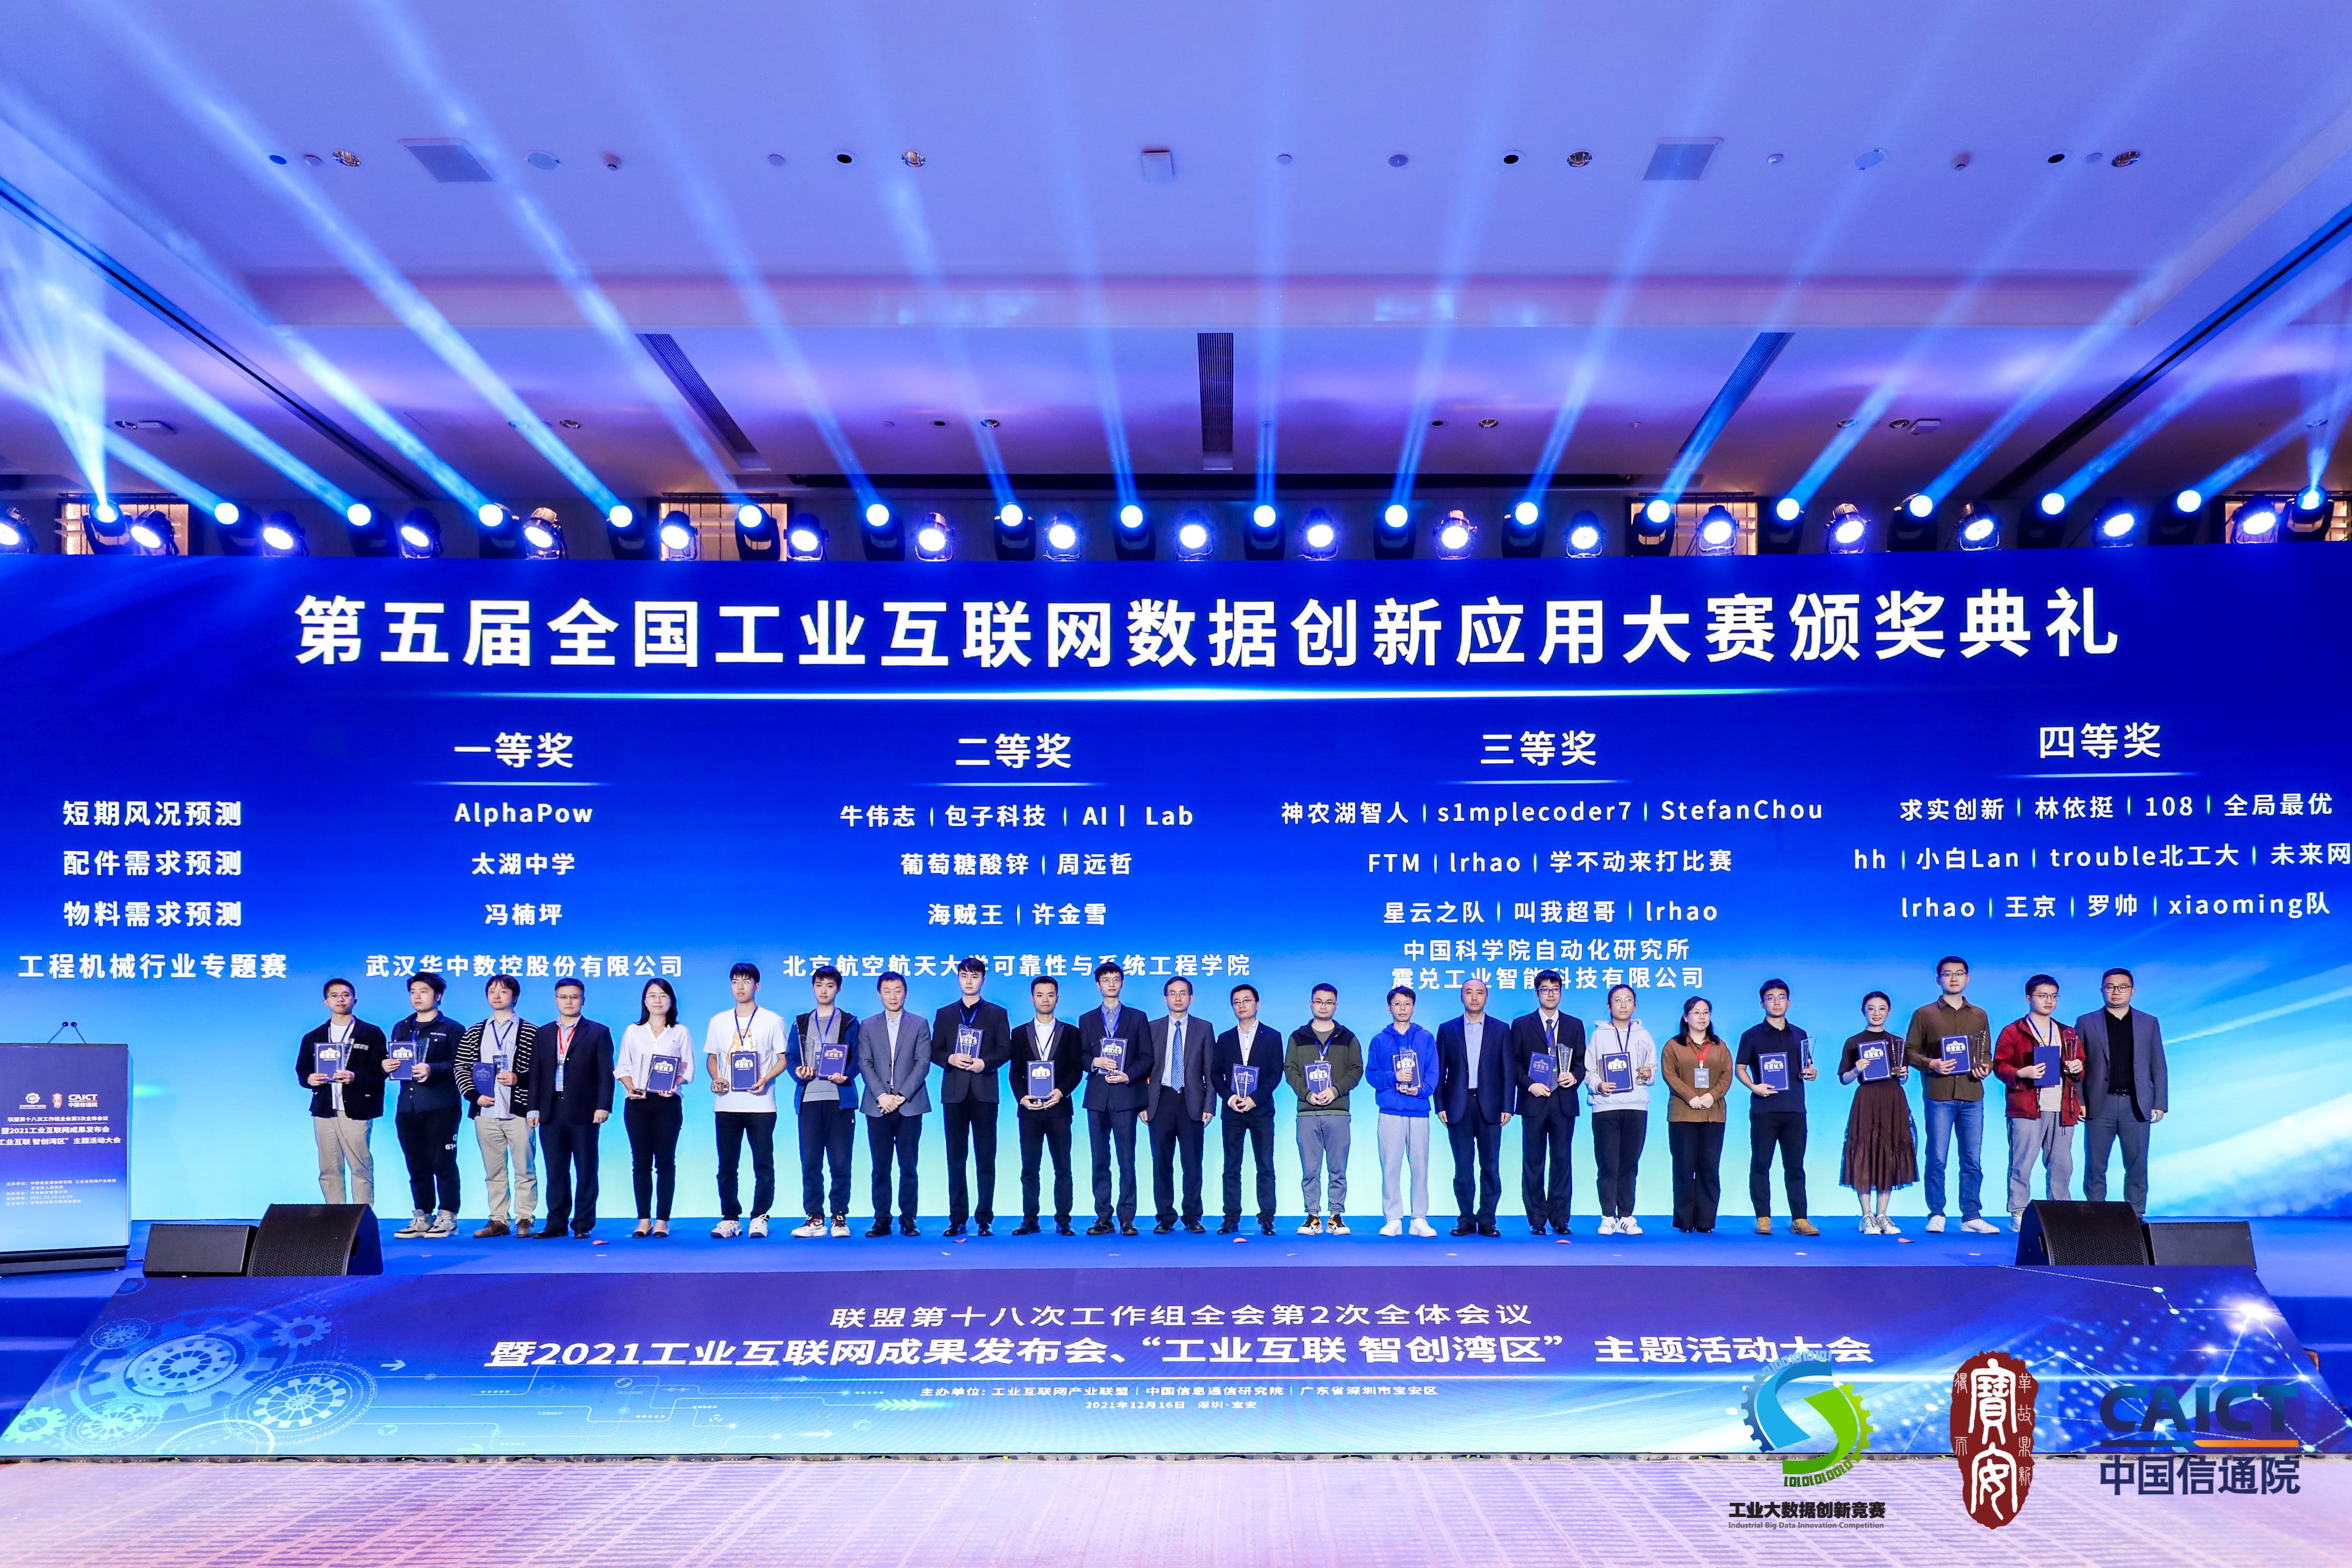 The 5th China Industrial Internet Data Innovation and Application Contest